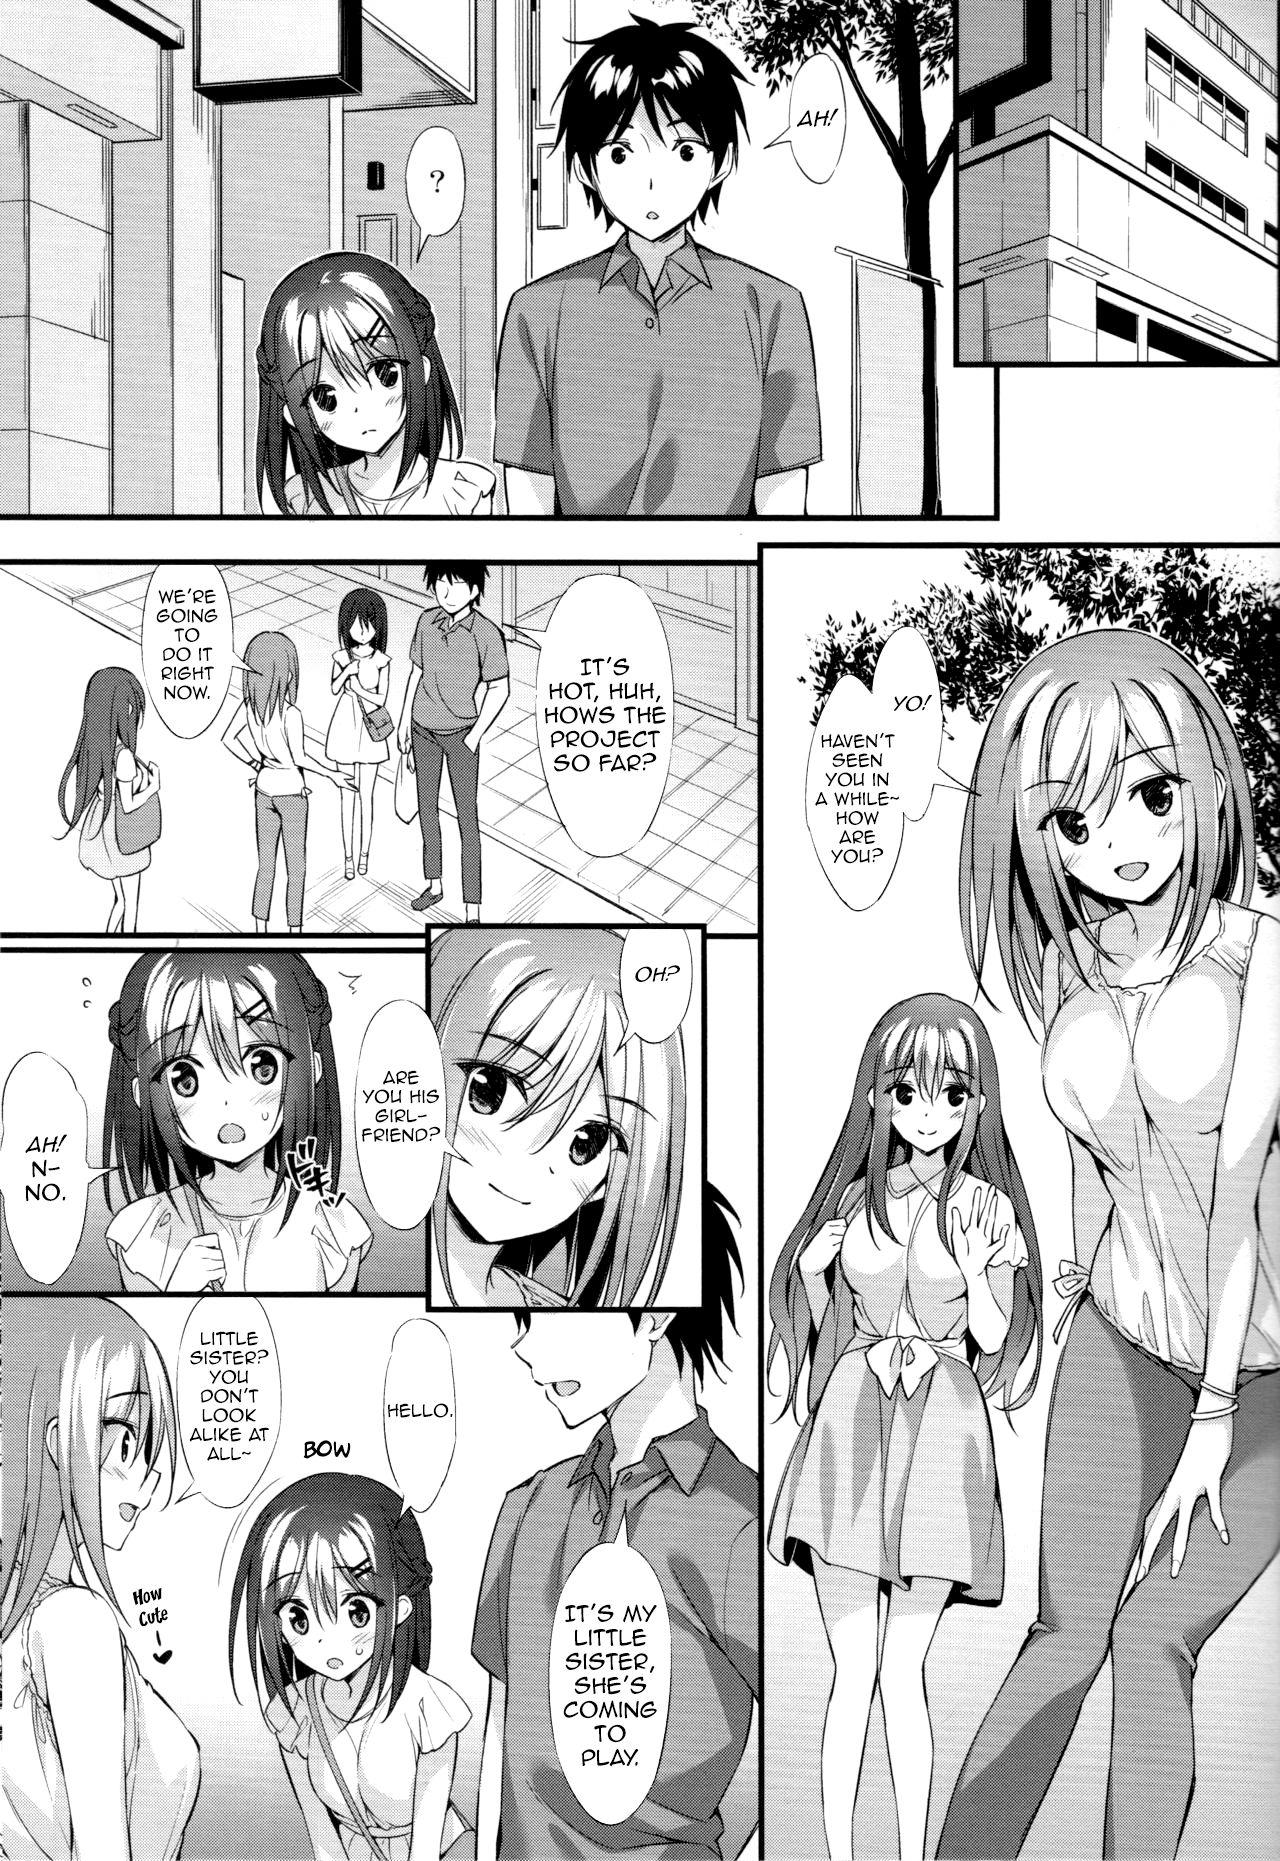 Tinytits (COMIC1☆13) [P:P (Oryou)] Onii-chan, Hitorijime Shitai no...! | I want you all for myself Onii-chan...! [English] [Comfy Pillow Scans] - Original Extreme - Page 2